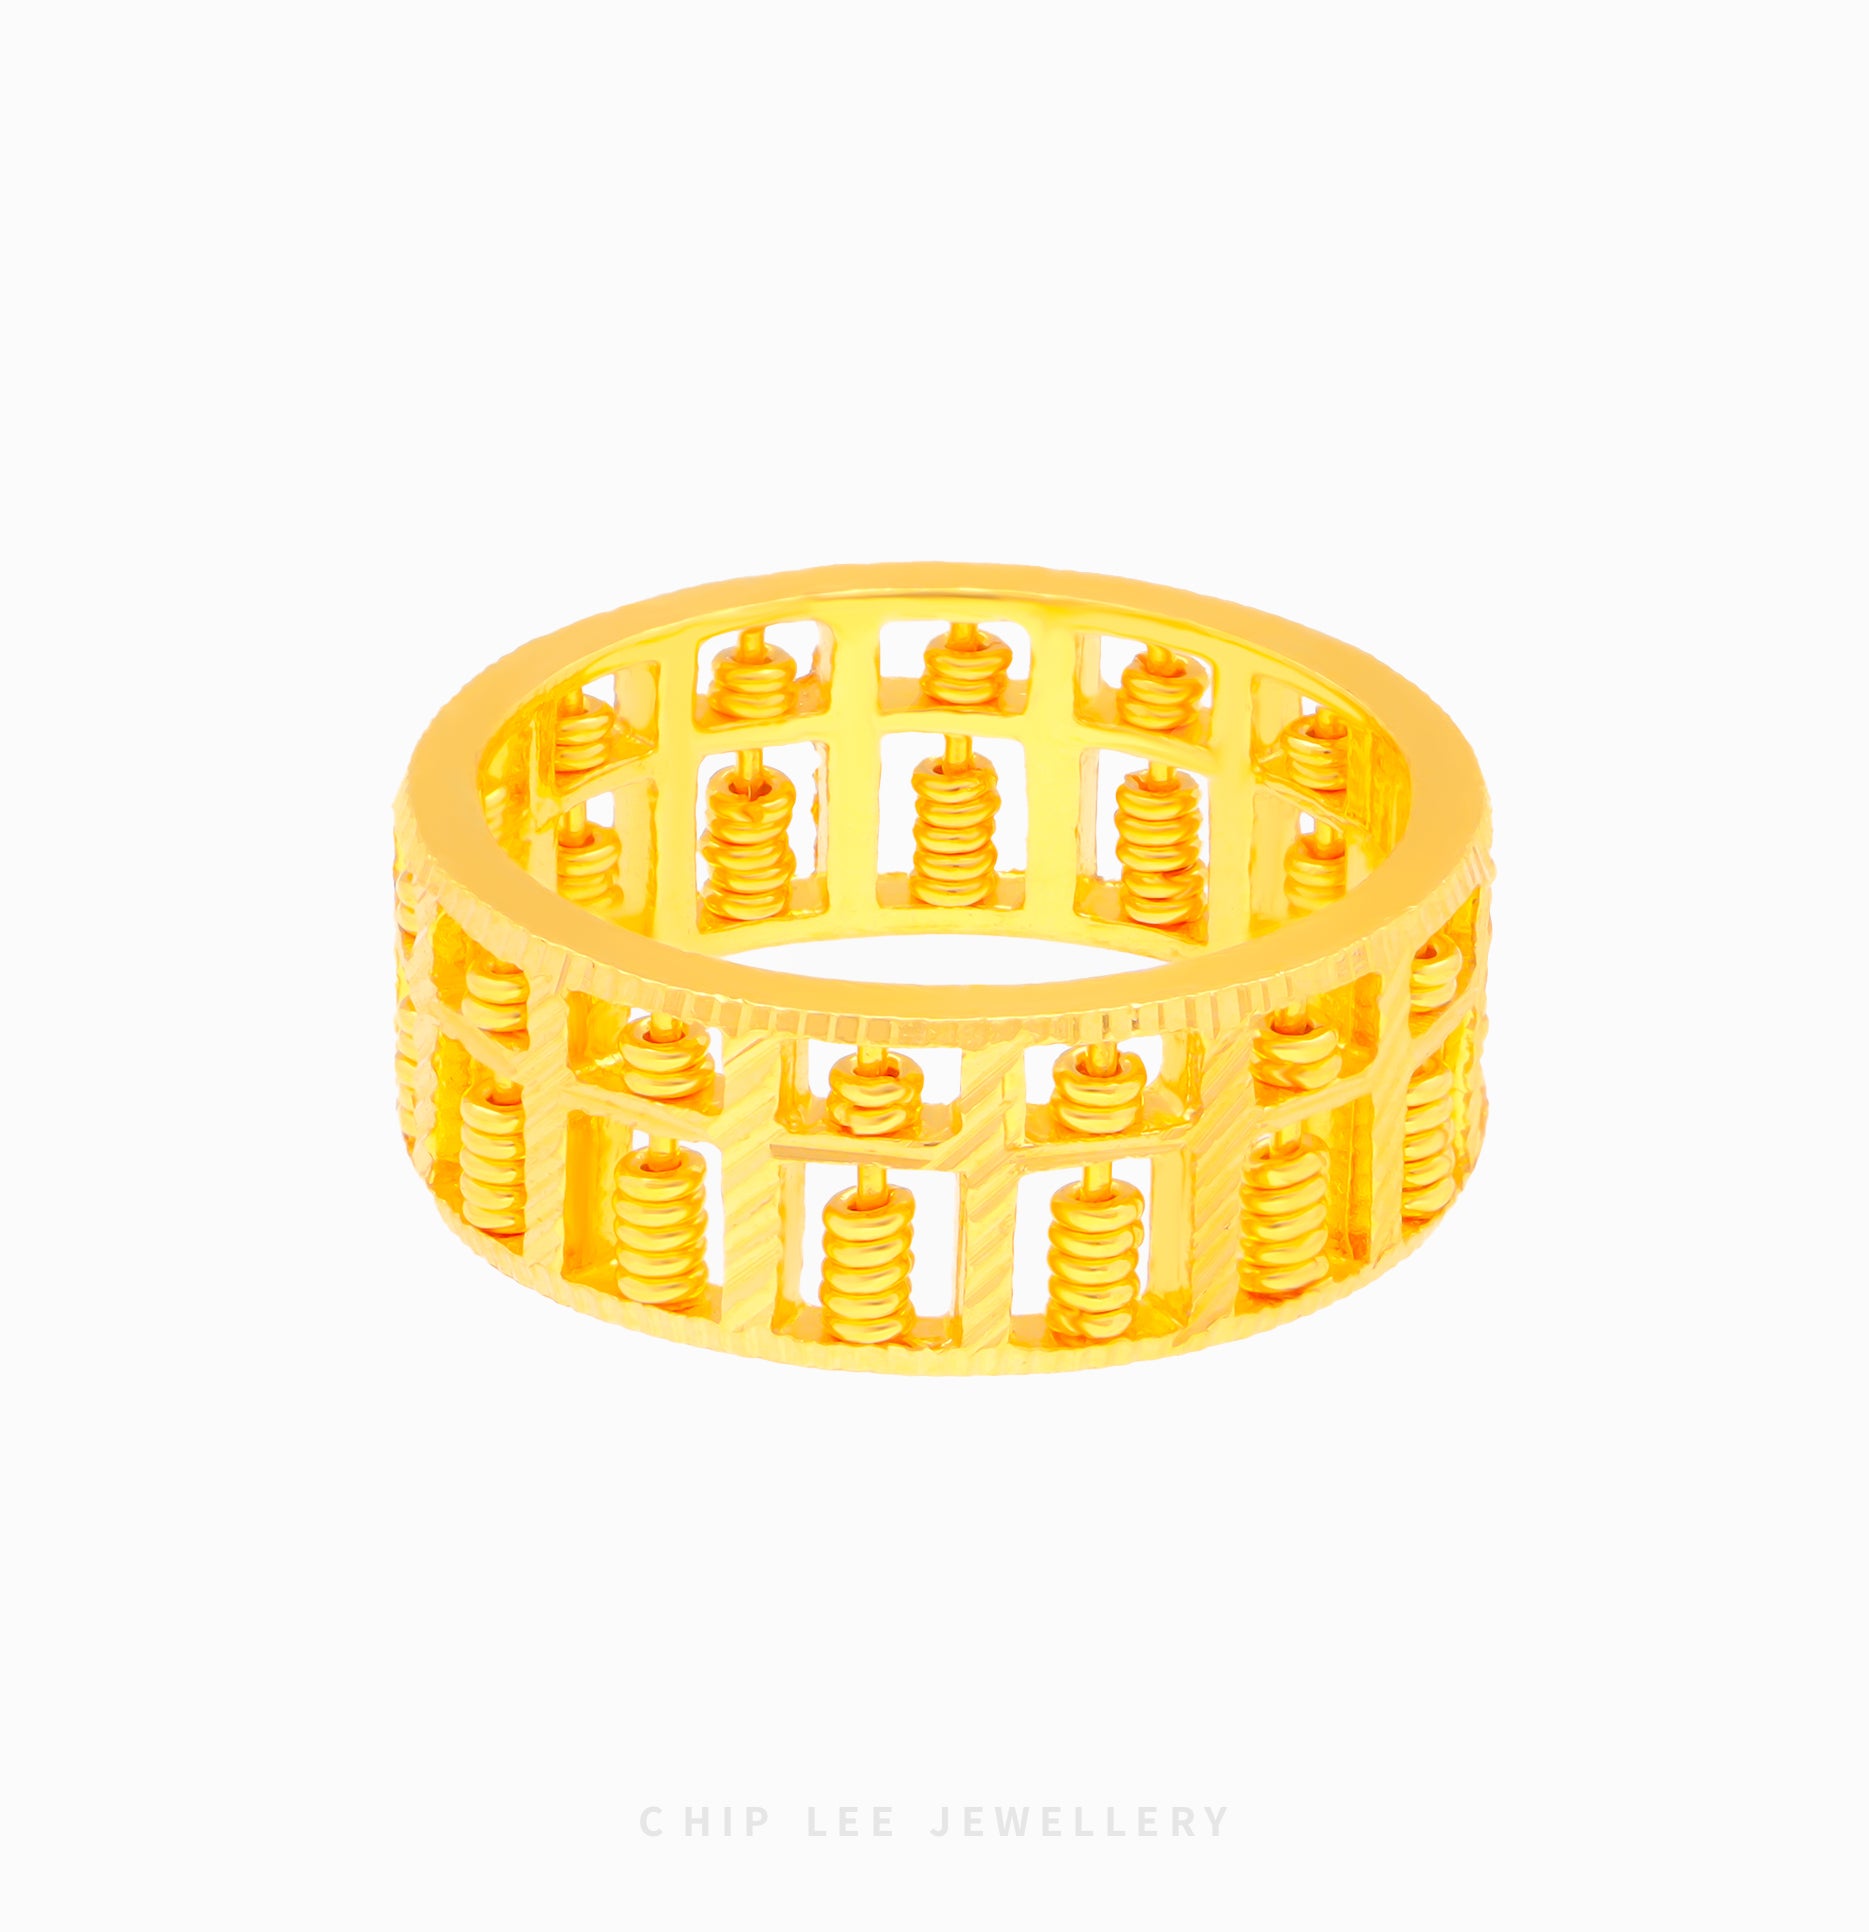 Abacus Ring - Chip Lee Jewellery